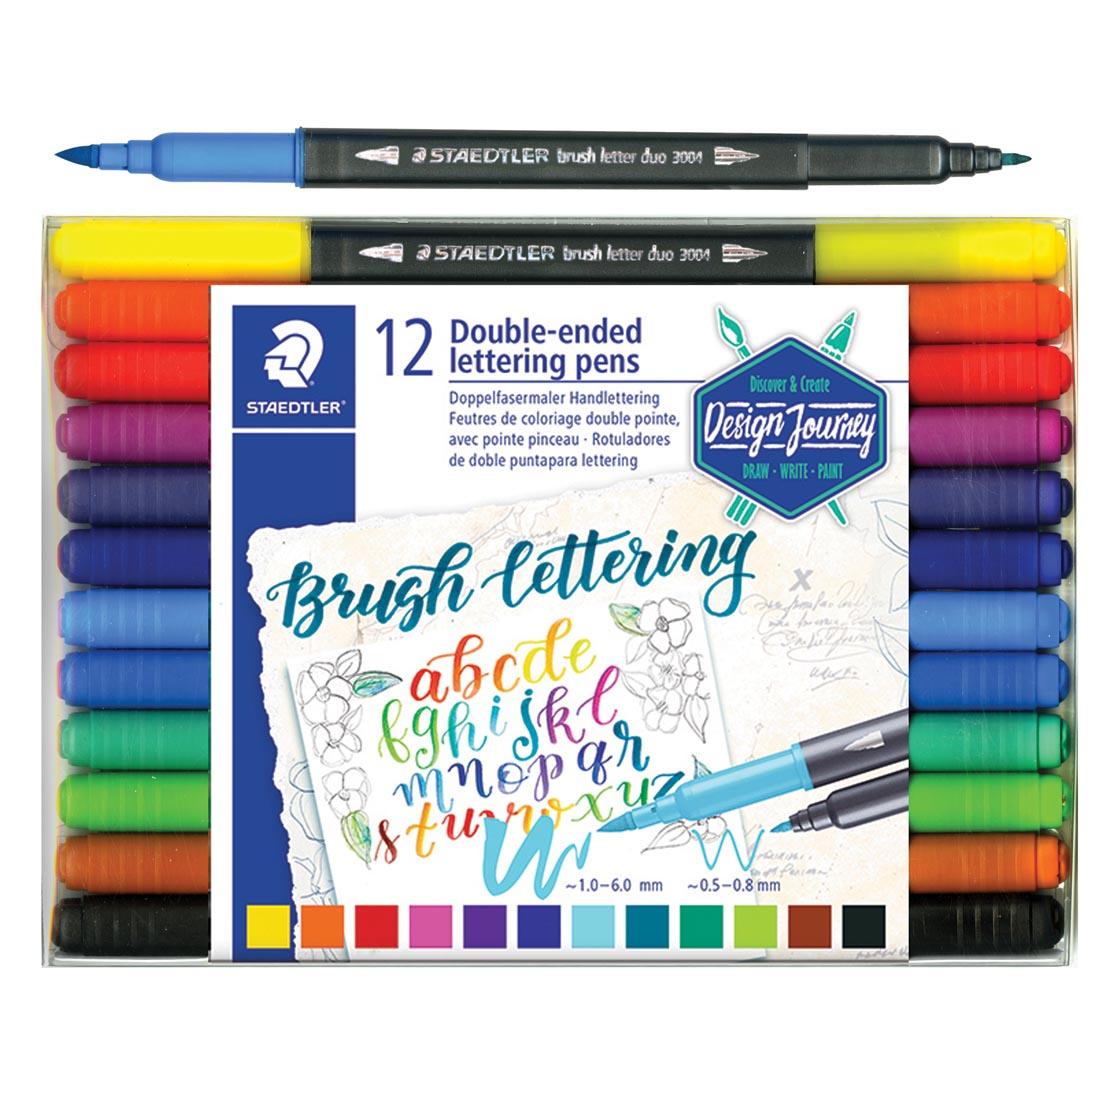 Staedtler Double-Ended Lettering Pens 12-Count Package below an individual pen with both caps off